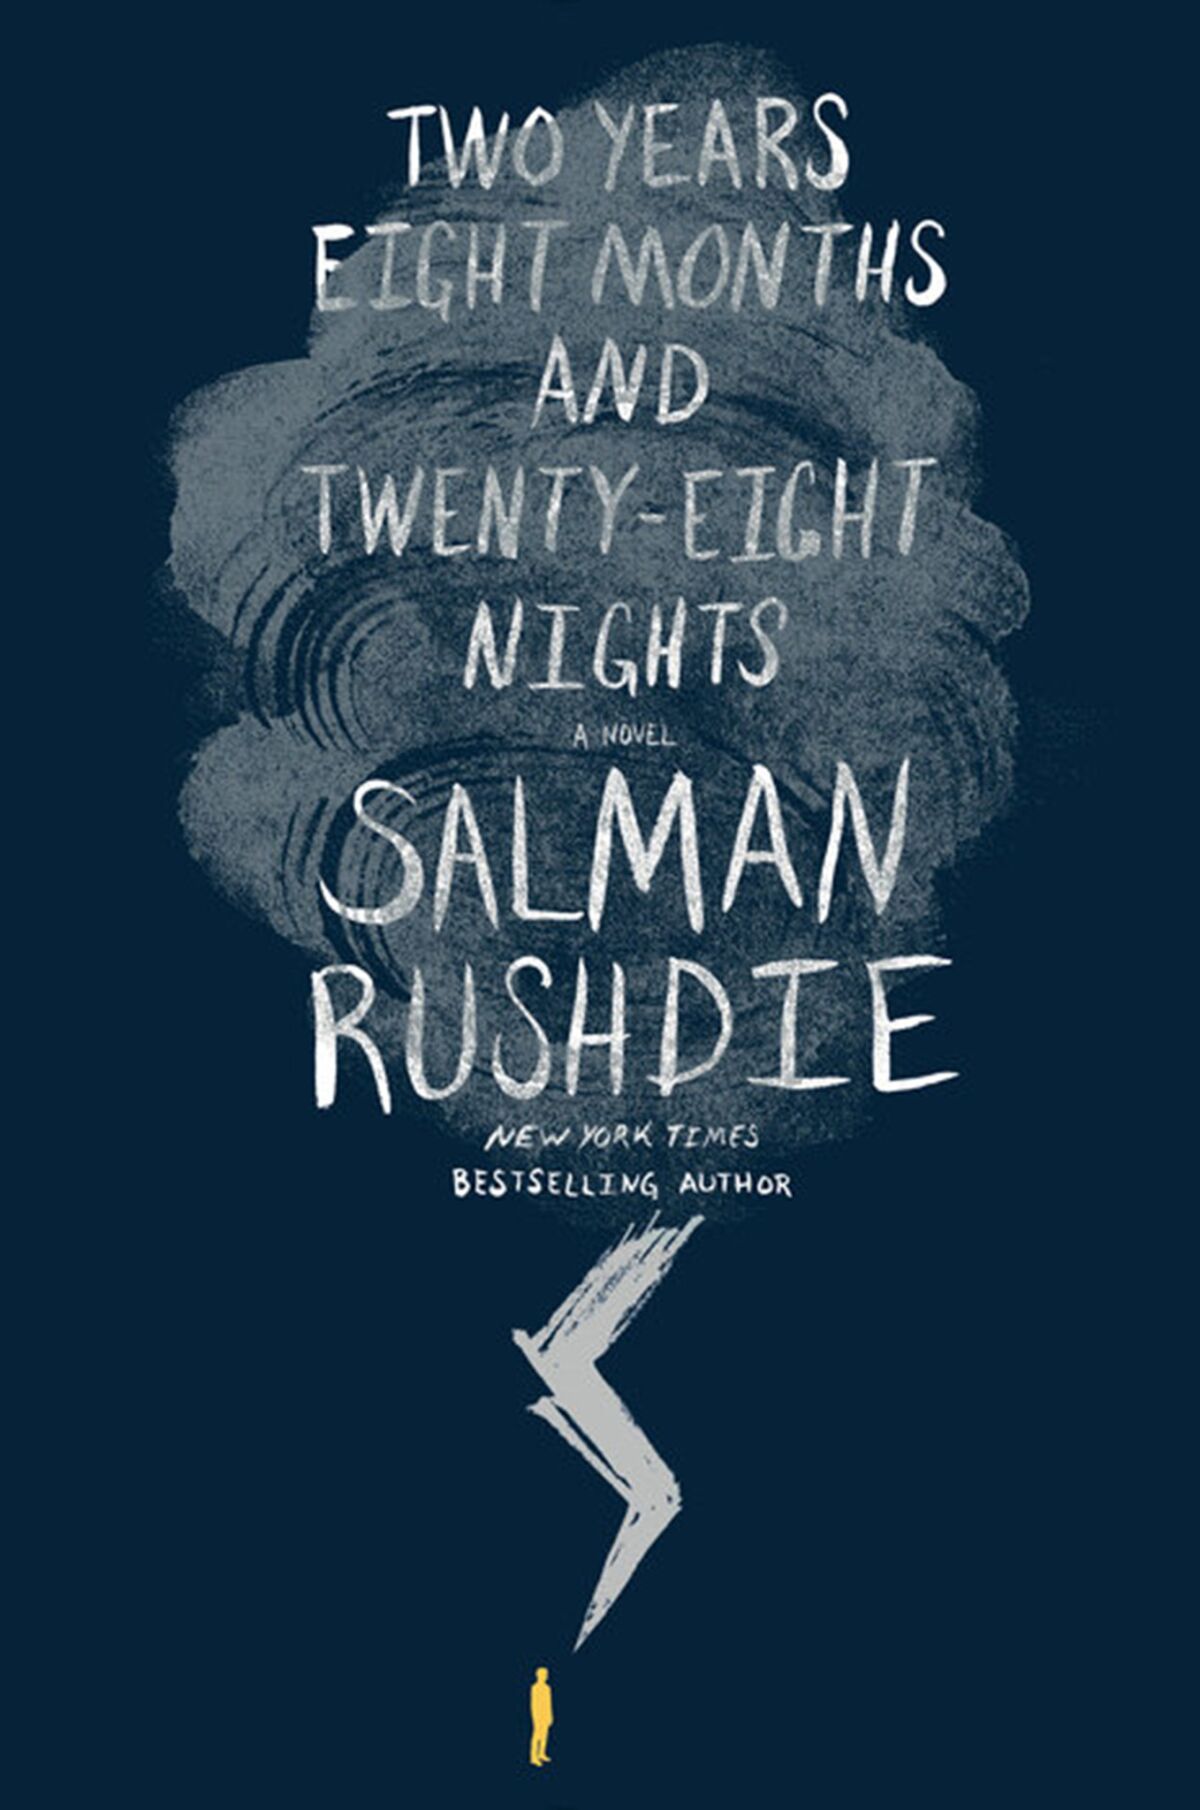 Two Years Eight Months And Twenty-Eight Nights by Salman Rushdie